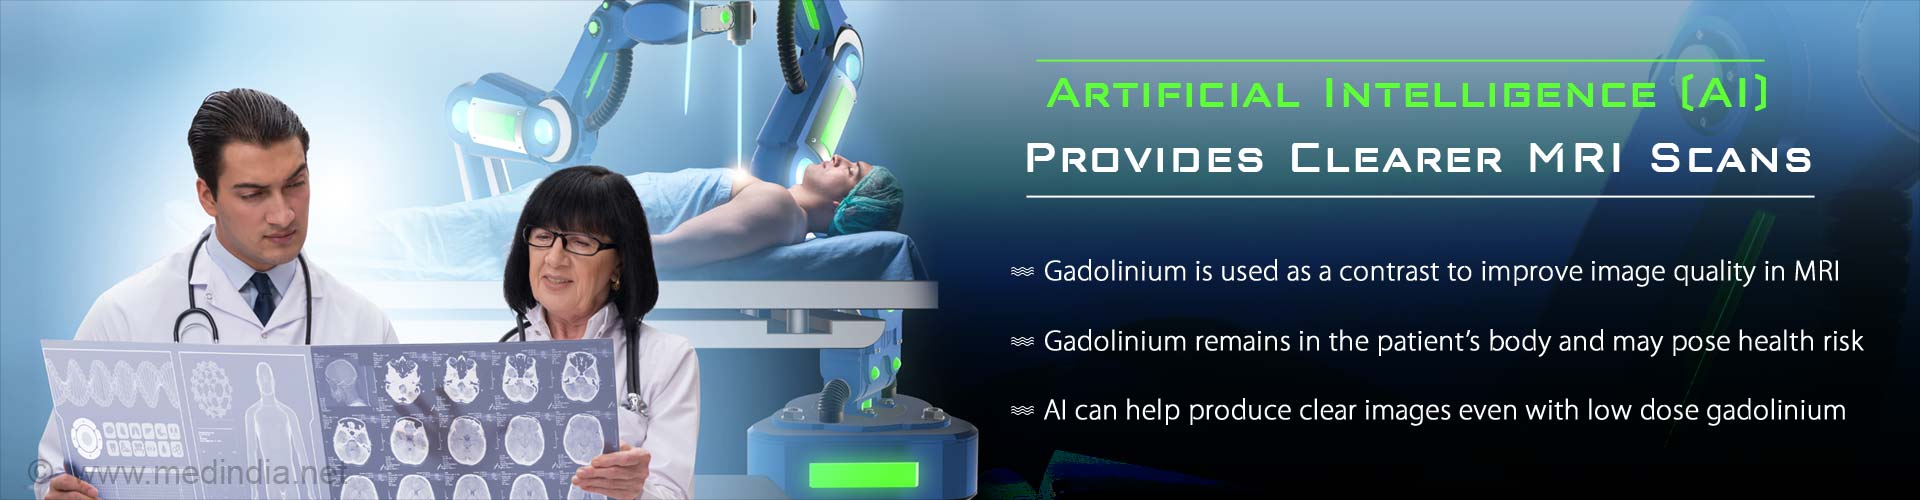 Artificial intelligence (AI) provides clearer MRI scans. Gadolinium is used as a contrast to improve image quality in MRI. Gadolinium remains in the patient's body and may pose health risk. AI can help produce clear images even with low dose gadolinium.